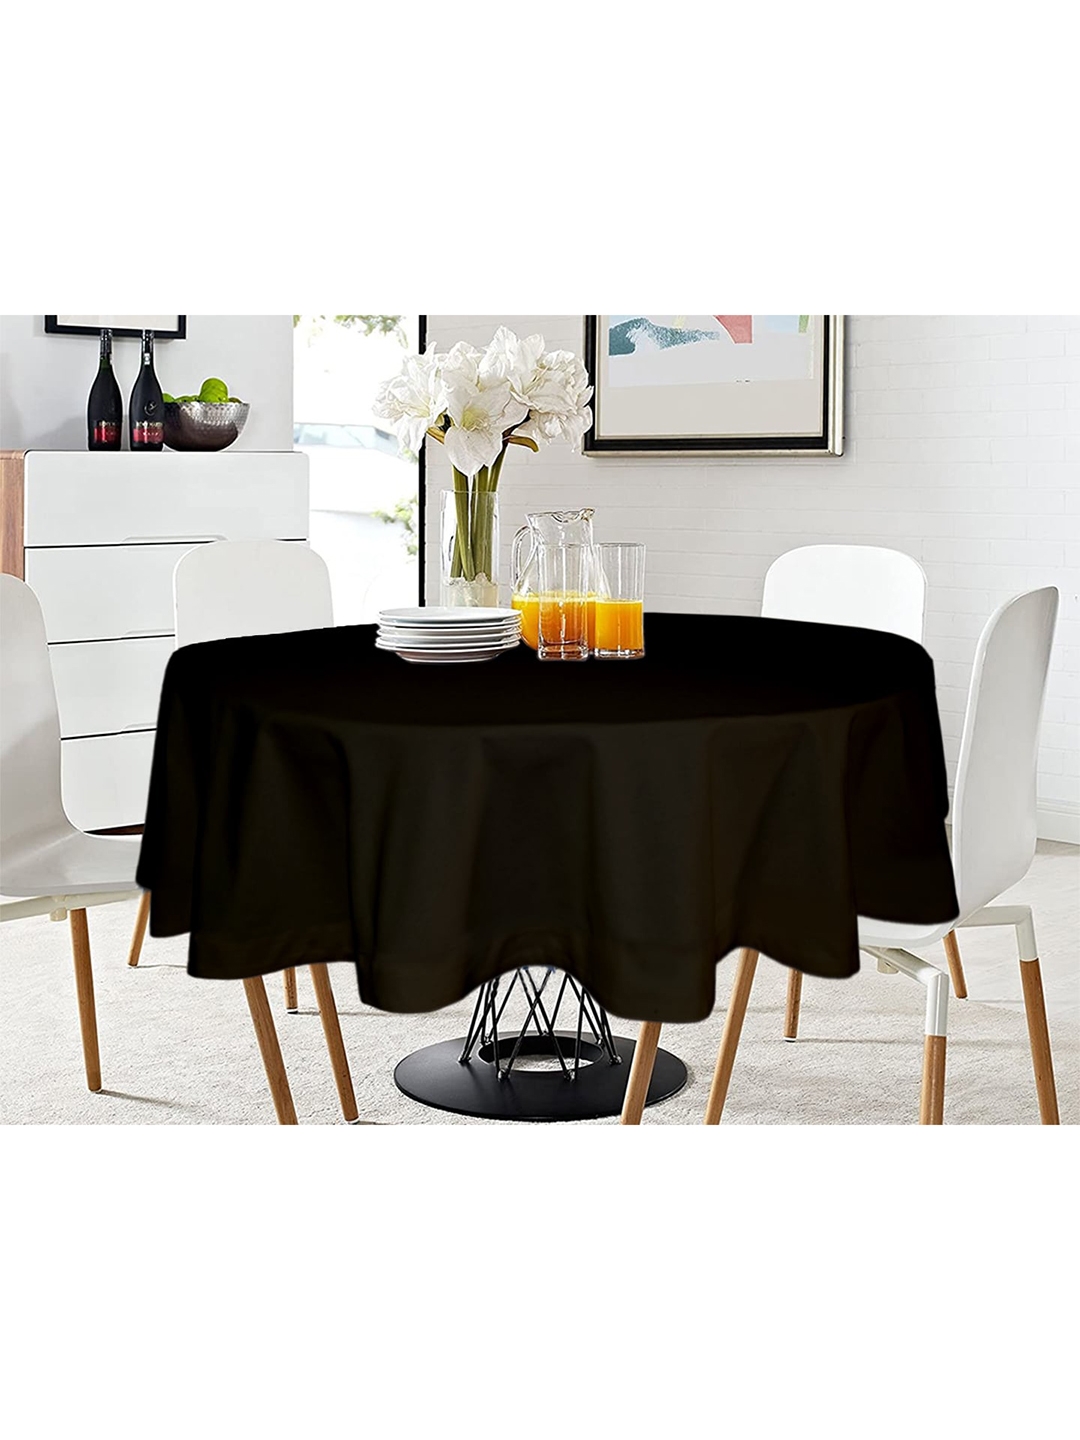 Lushomes Black Solid Cotton 4 Seater Table Cover